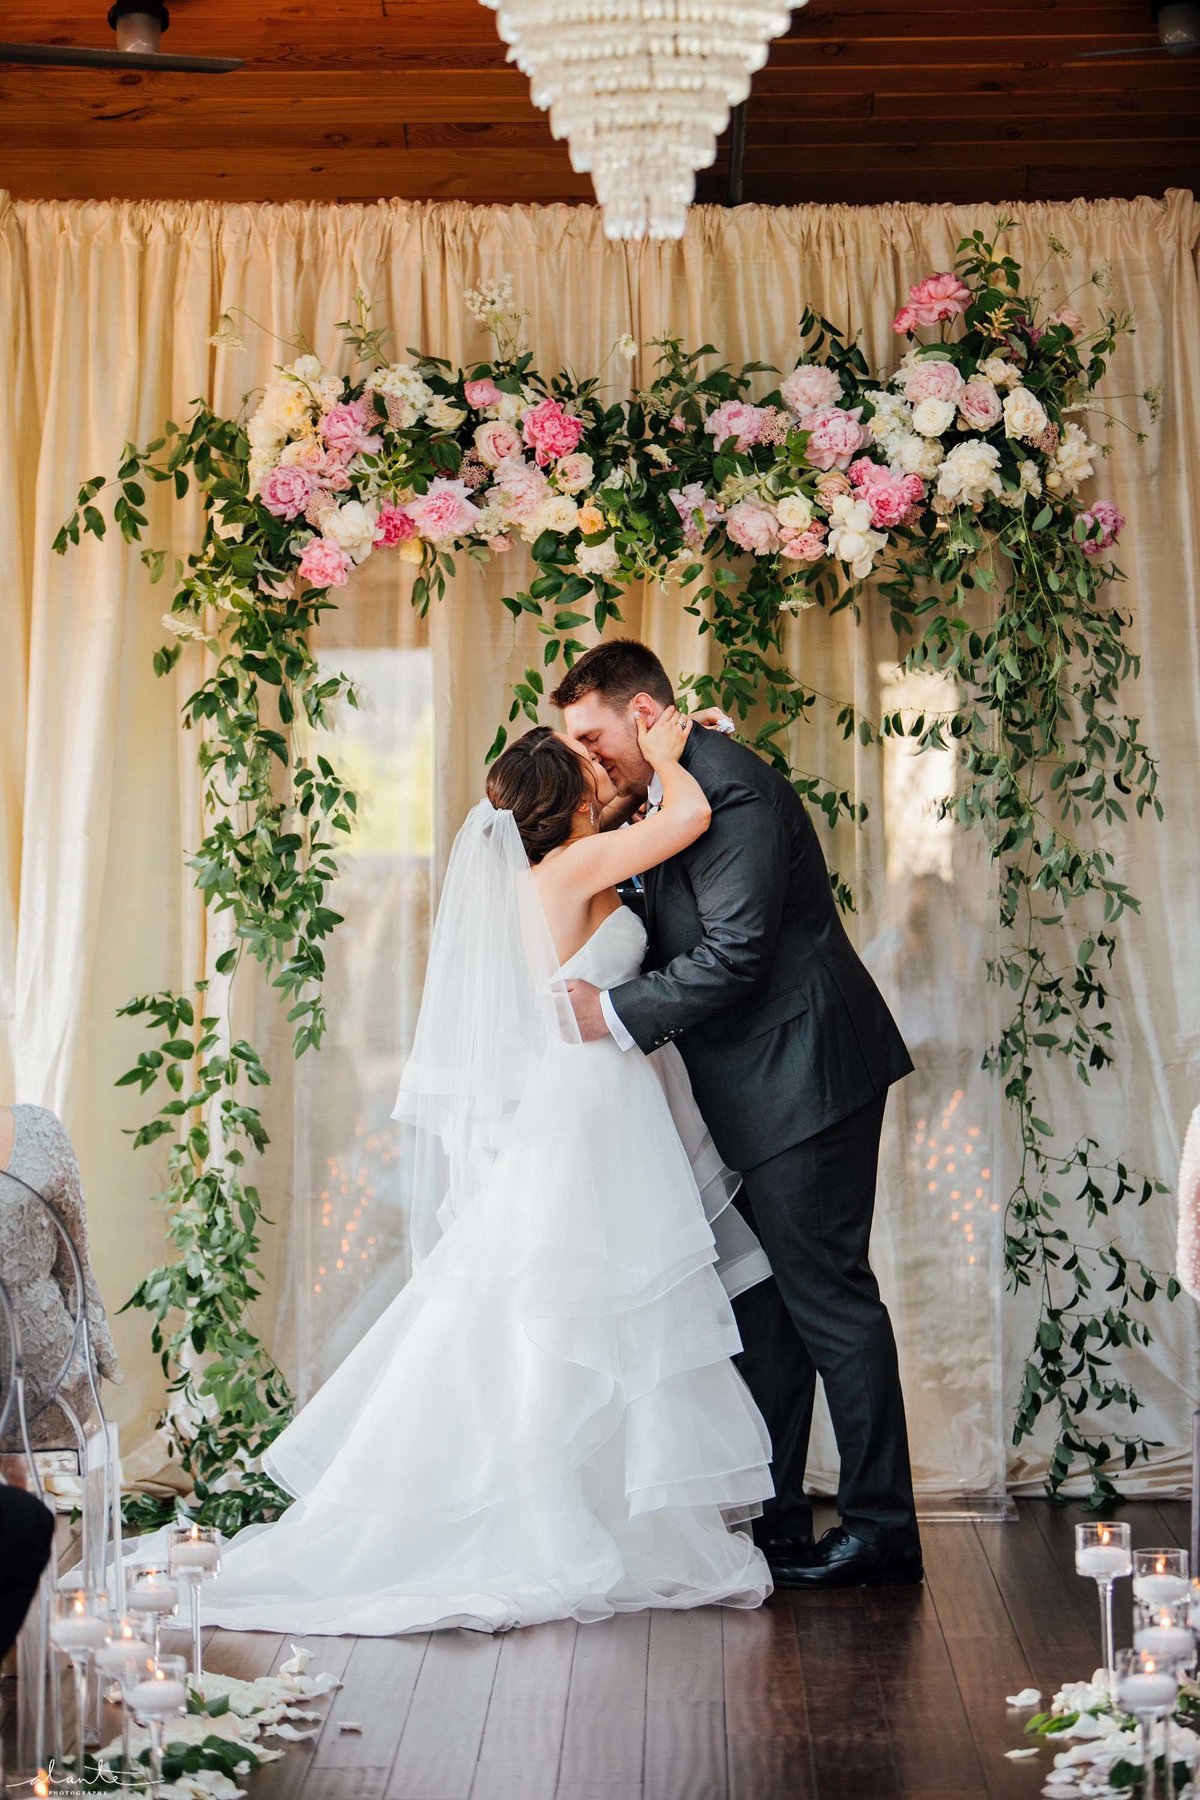 This beautiful ceremony designed by Flora Nova design had all our favorite elements, chandeliers, lucite, candlelight and peonies.